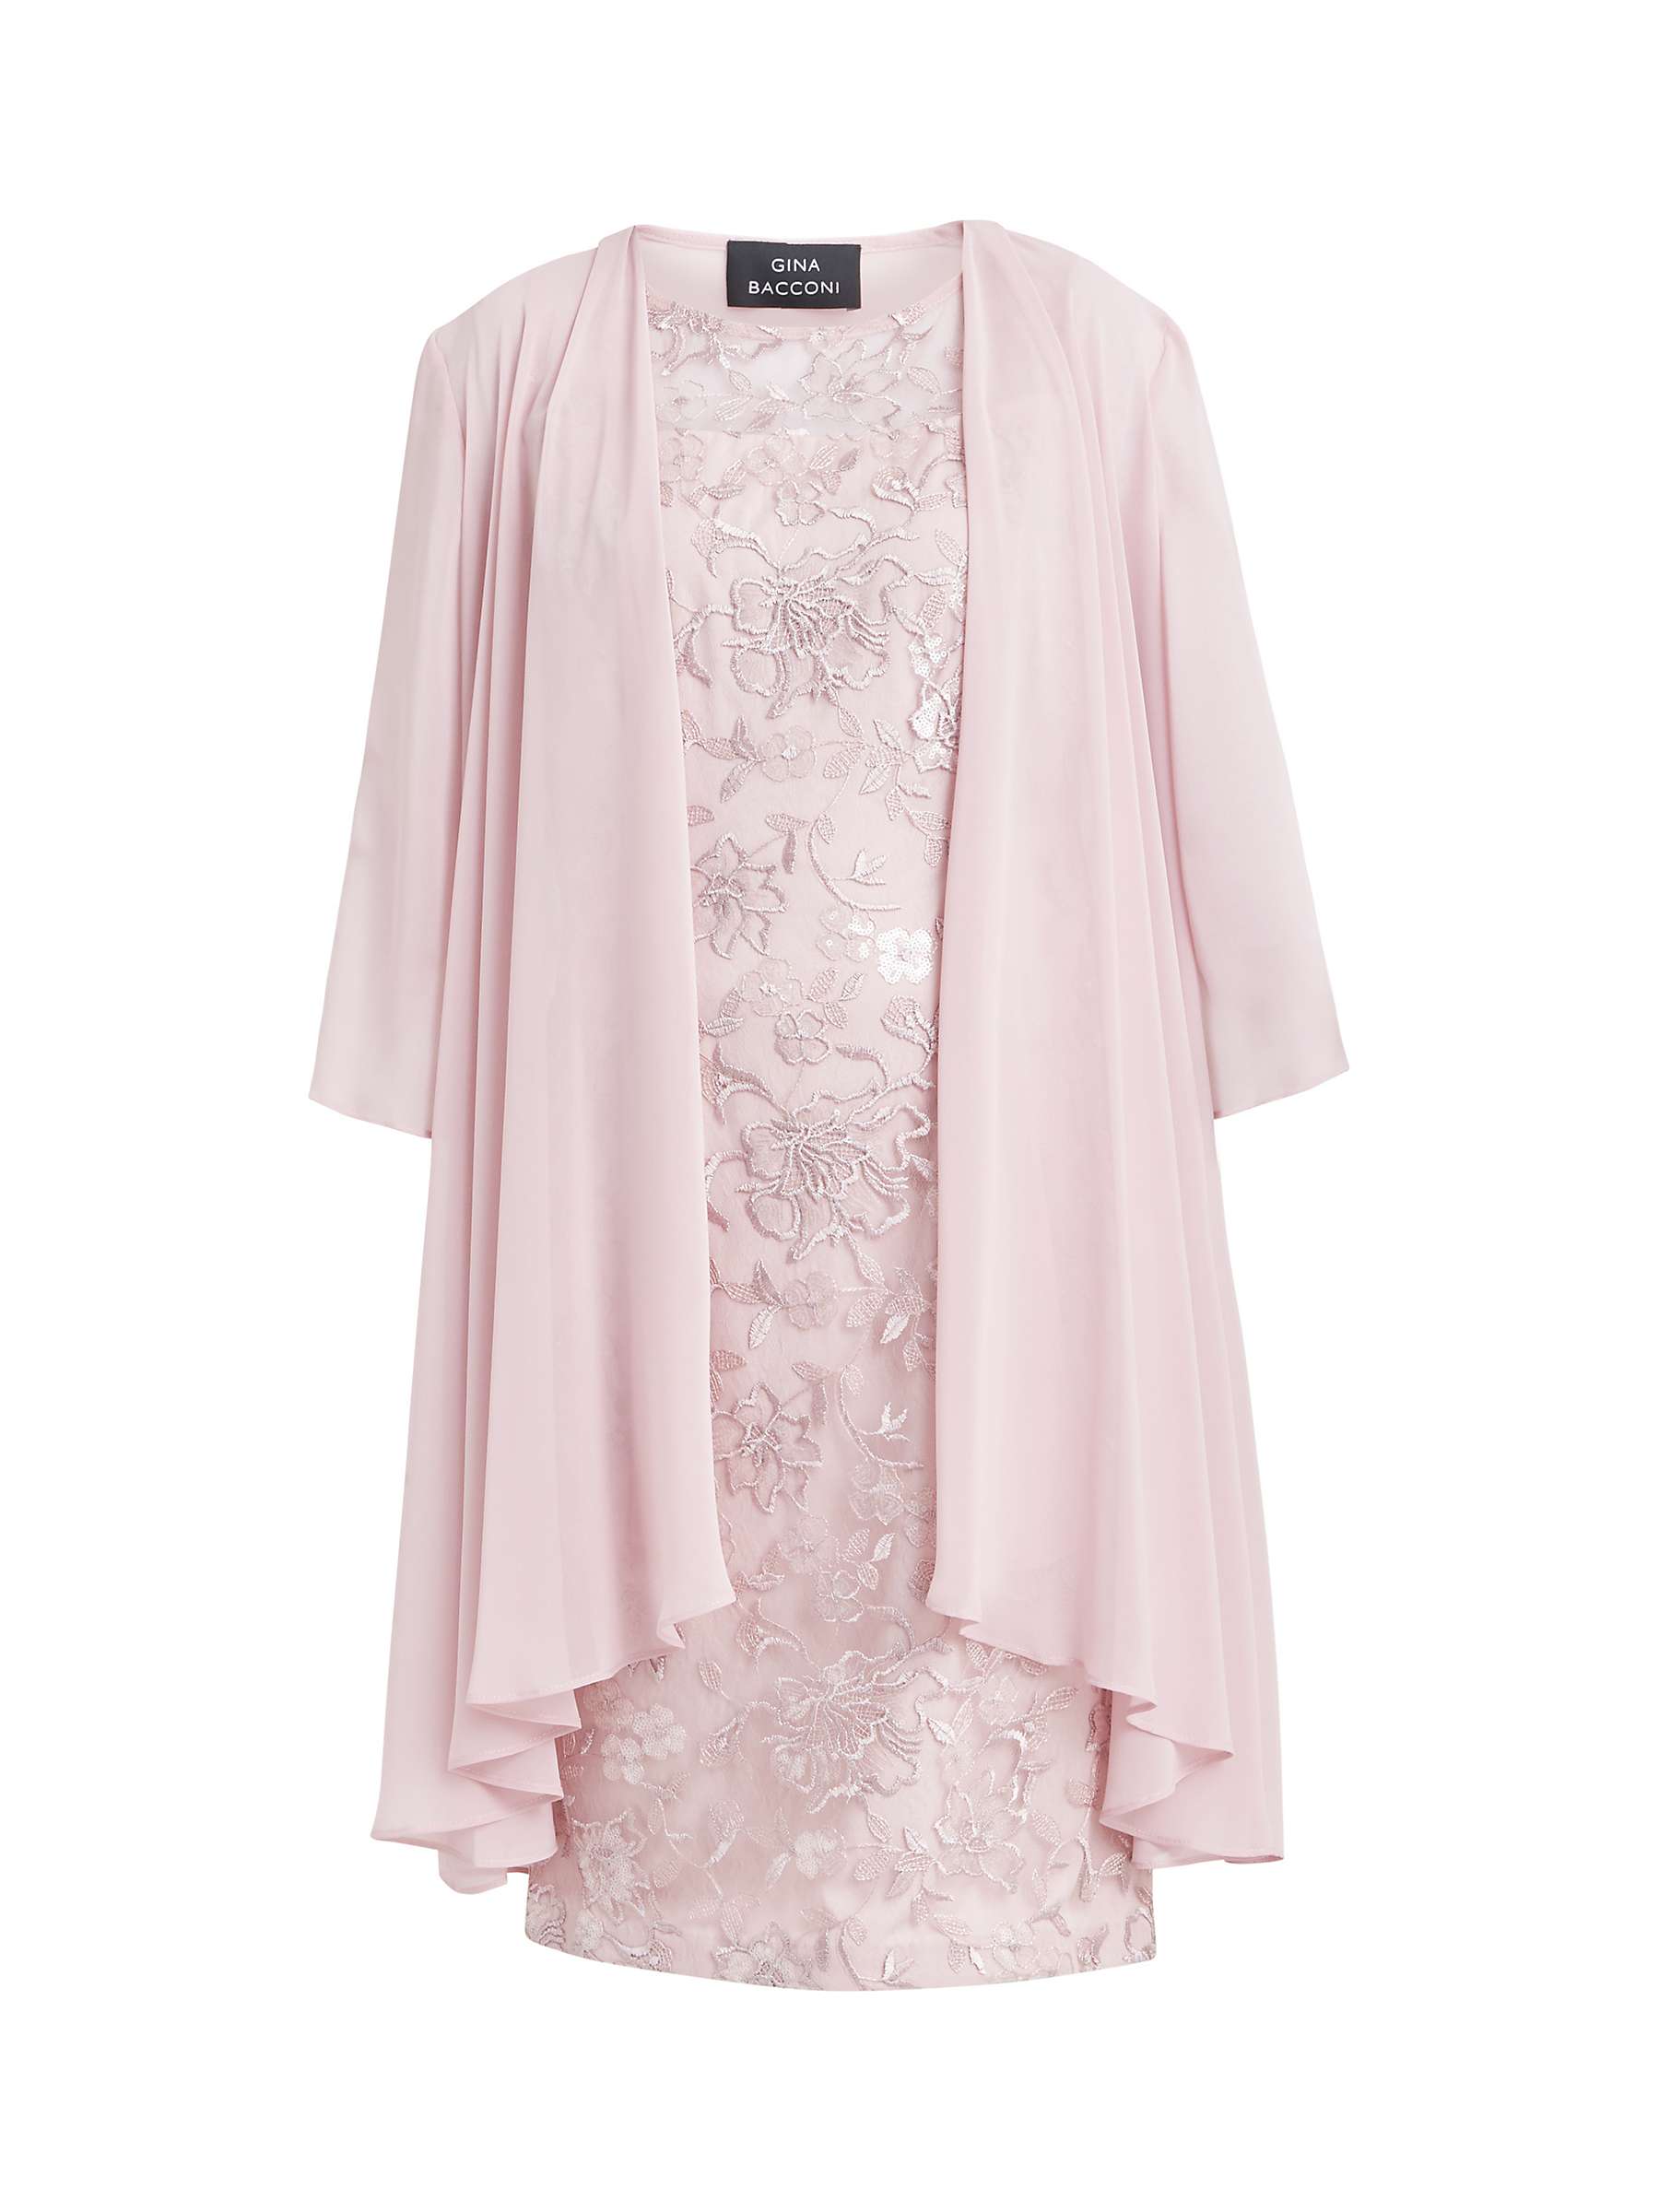 Buy Gina Bacconi Hayley Embroidered Dress, Rose Pink Online at johnlewis.com